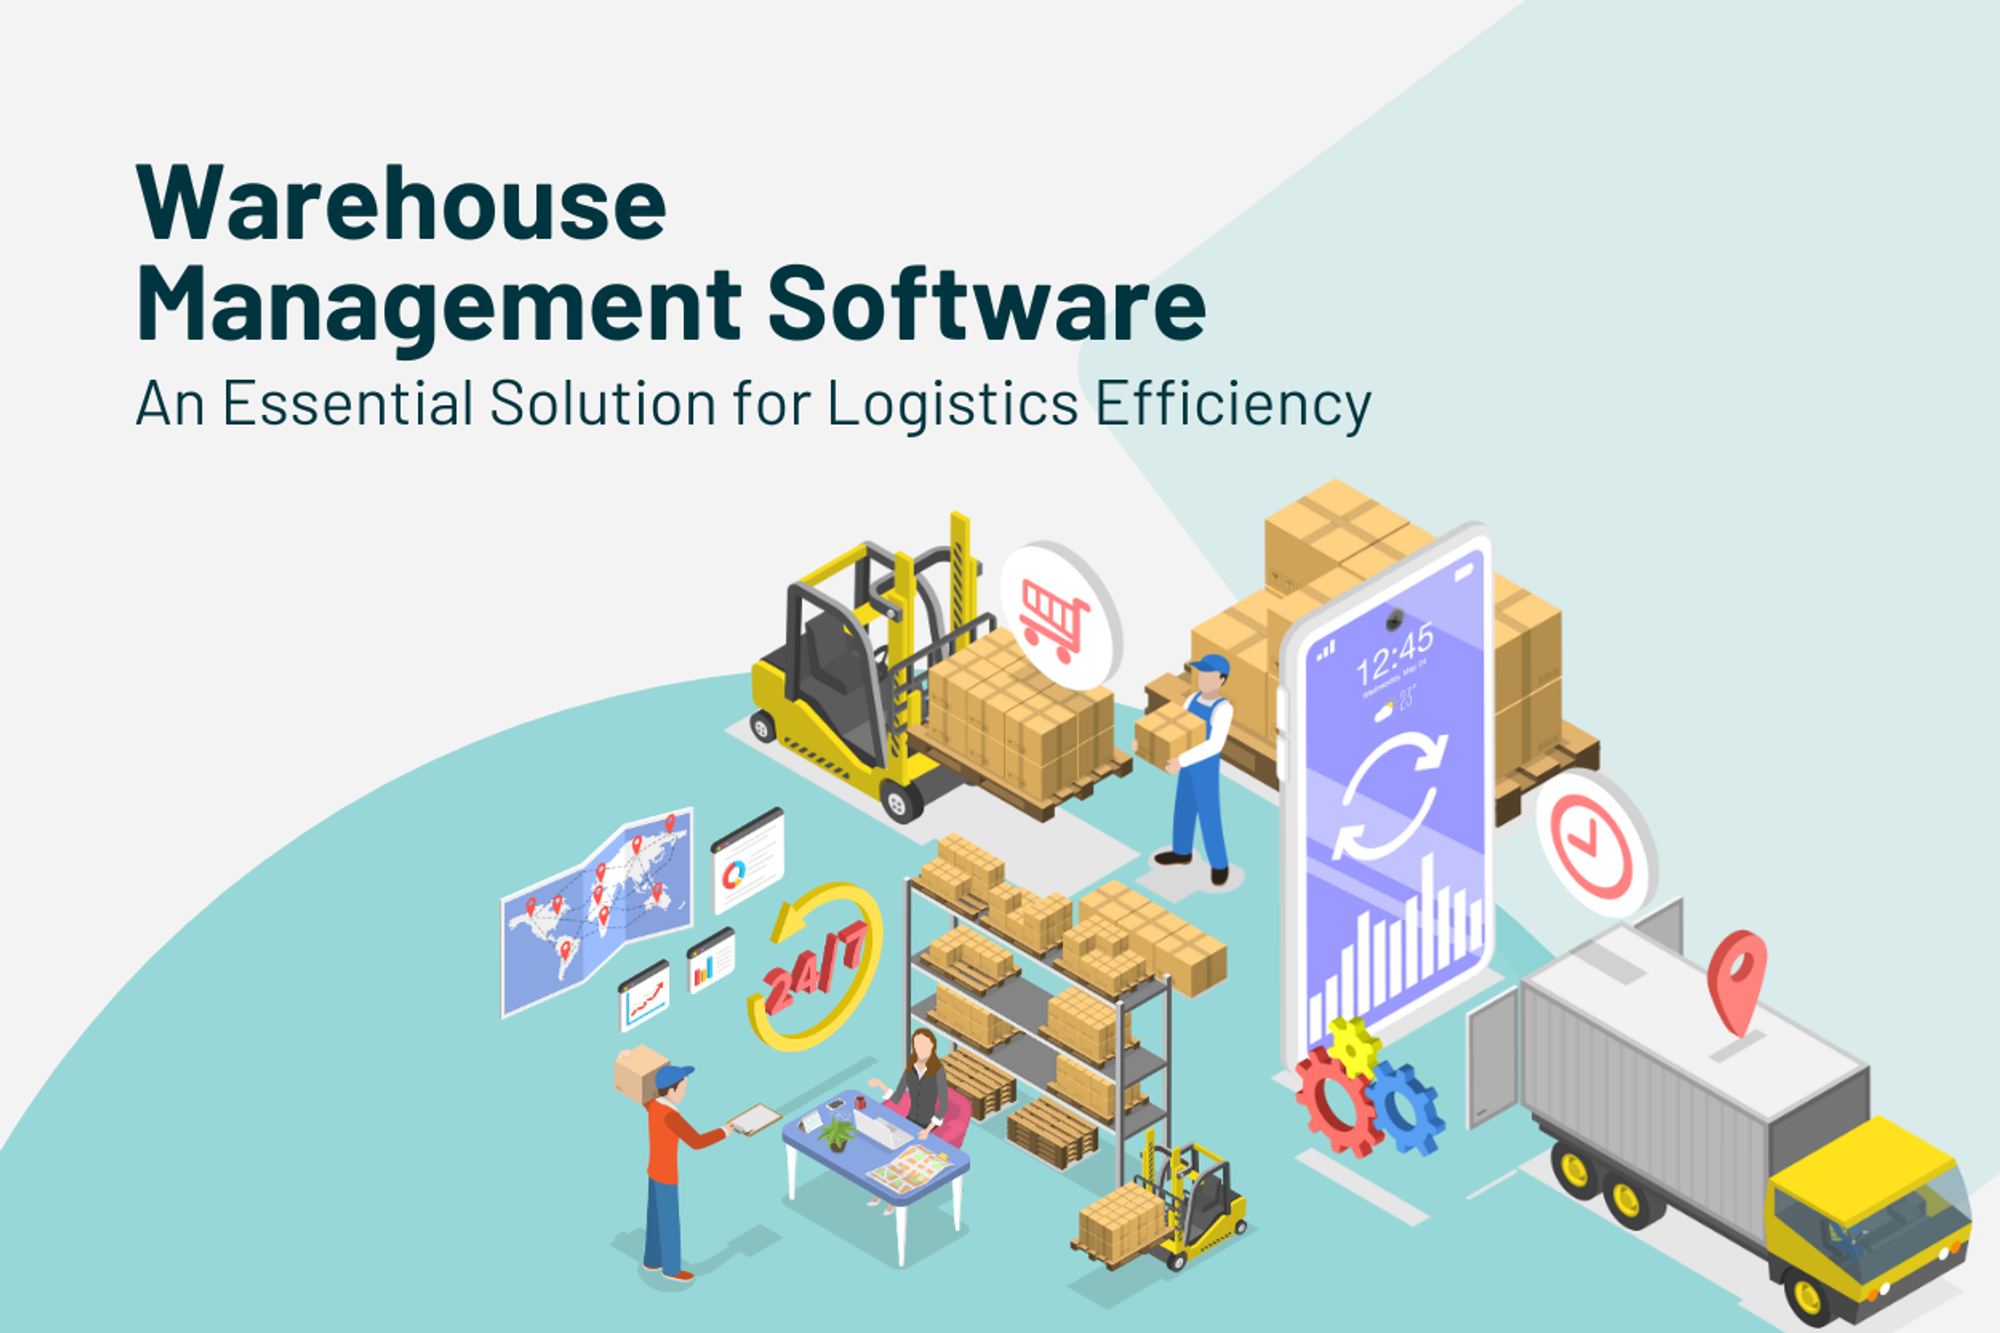 Warehouse Management Software: An Essential Solution for Logistics Efficiency